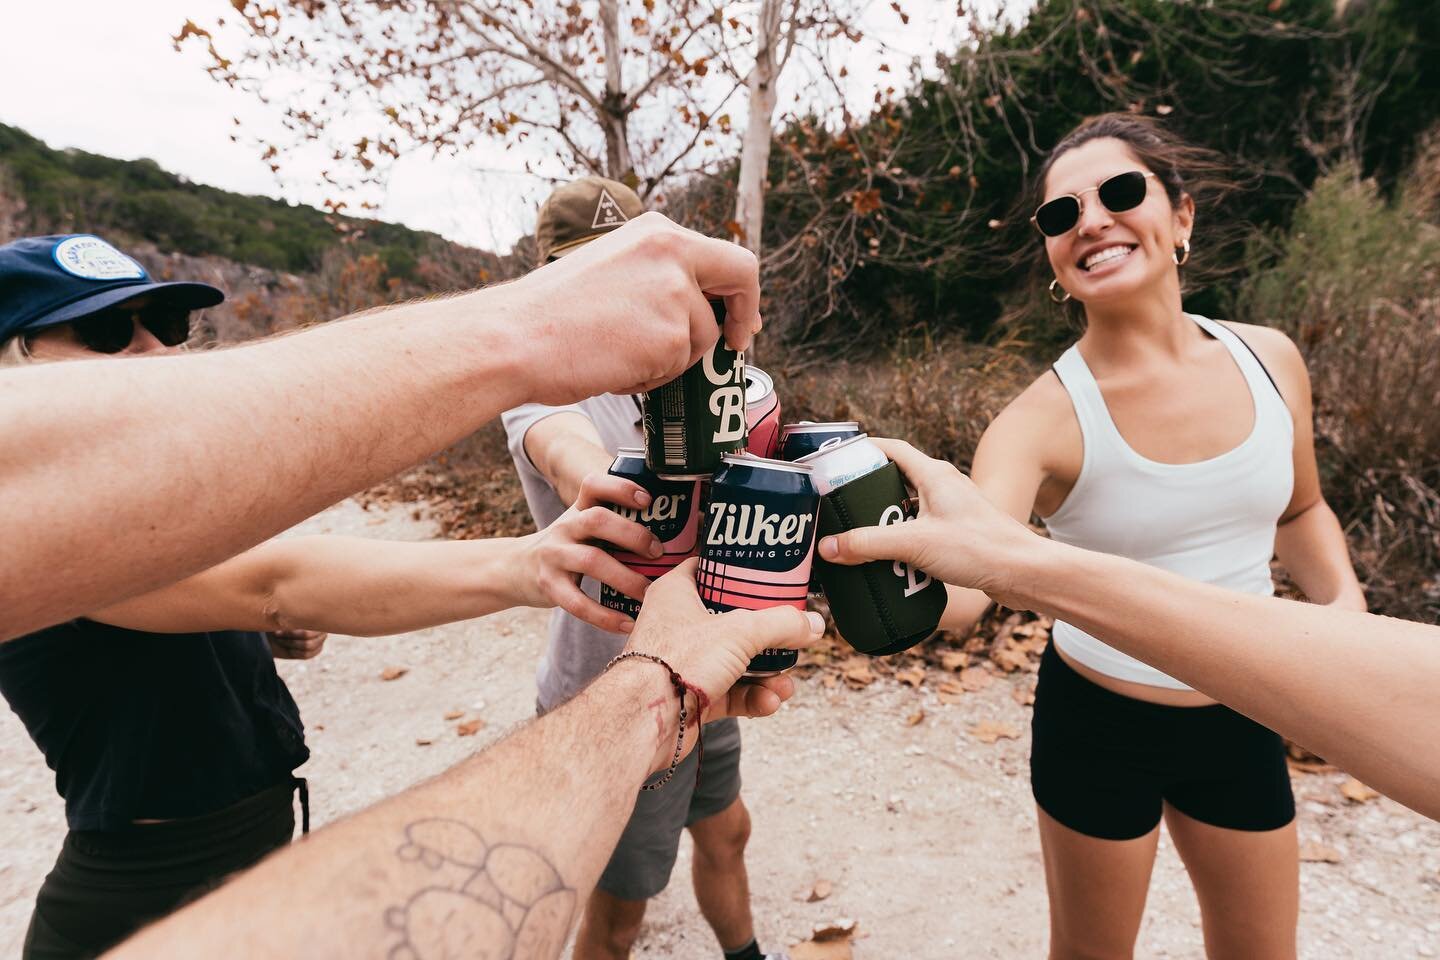 Cheers to a new month and a new hiking challenge!

Hike 10 to 25 cumulative miles throughout March for a chance to earn some O&amp;O gear, and recently relaunched Camp Beer from @zilkerbeer! 

Join the Cactus Club on @strava to start logging miles - 